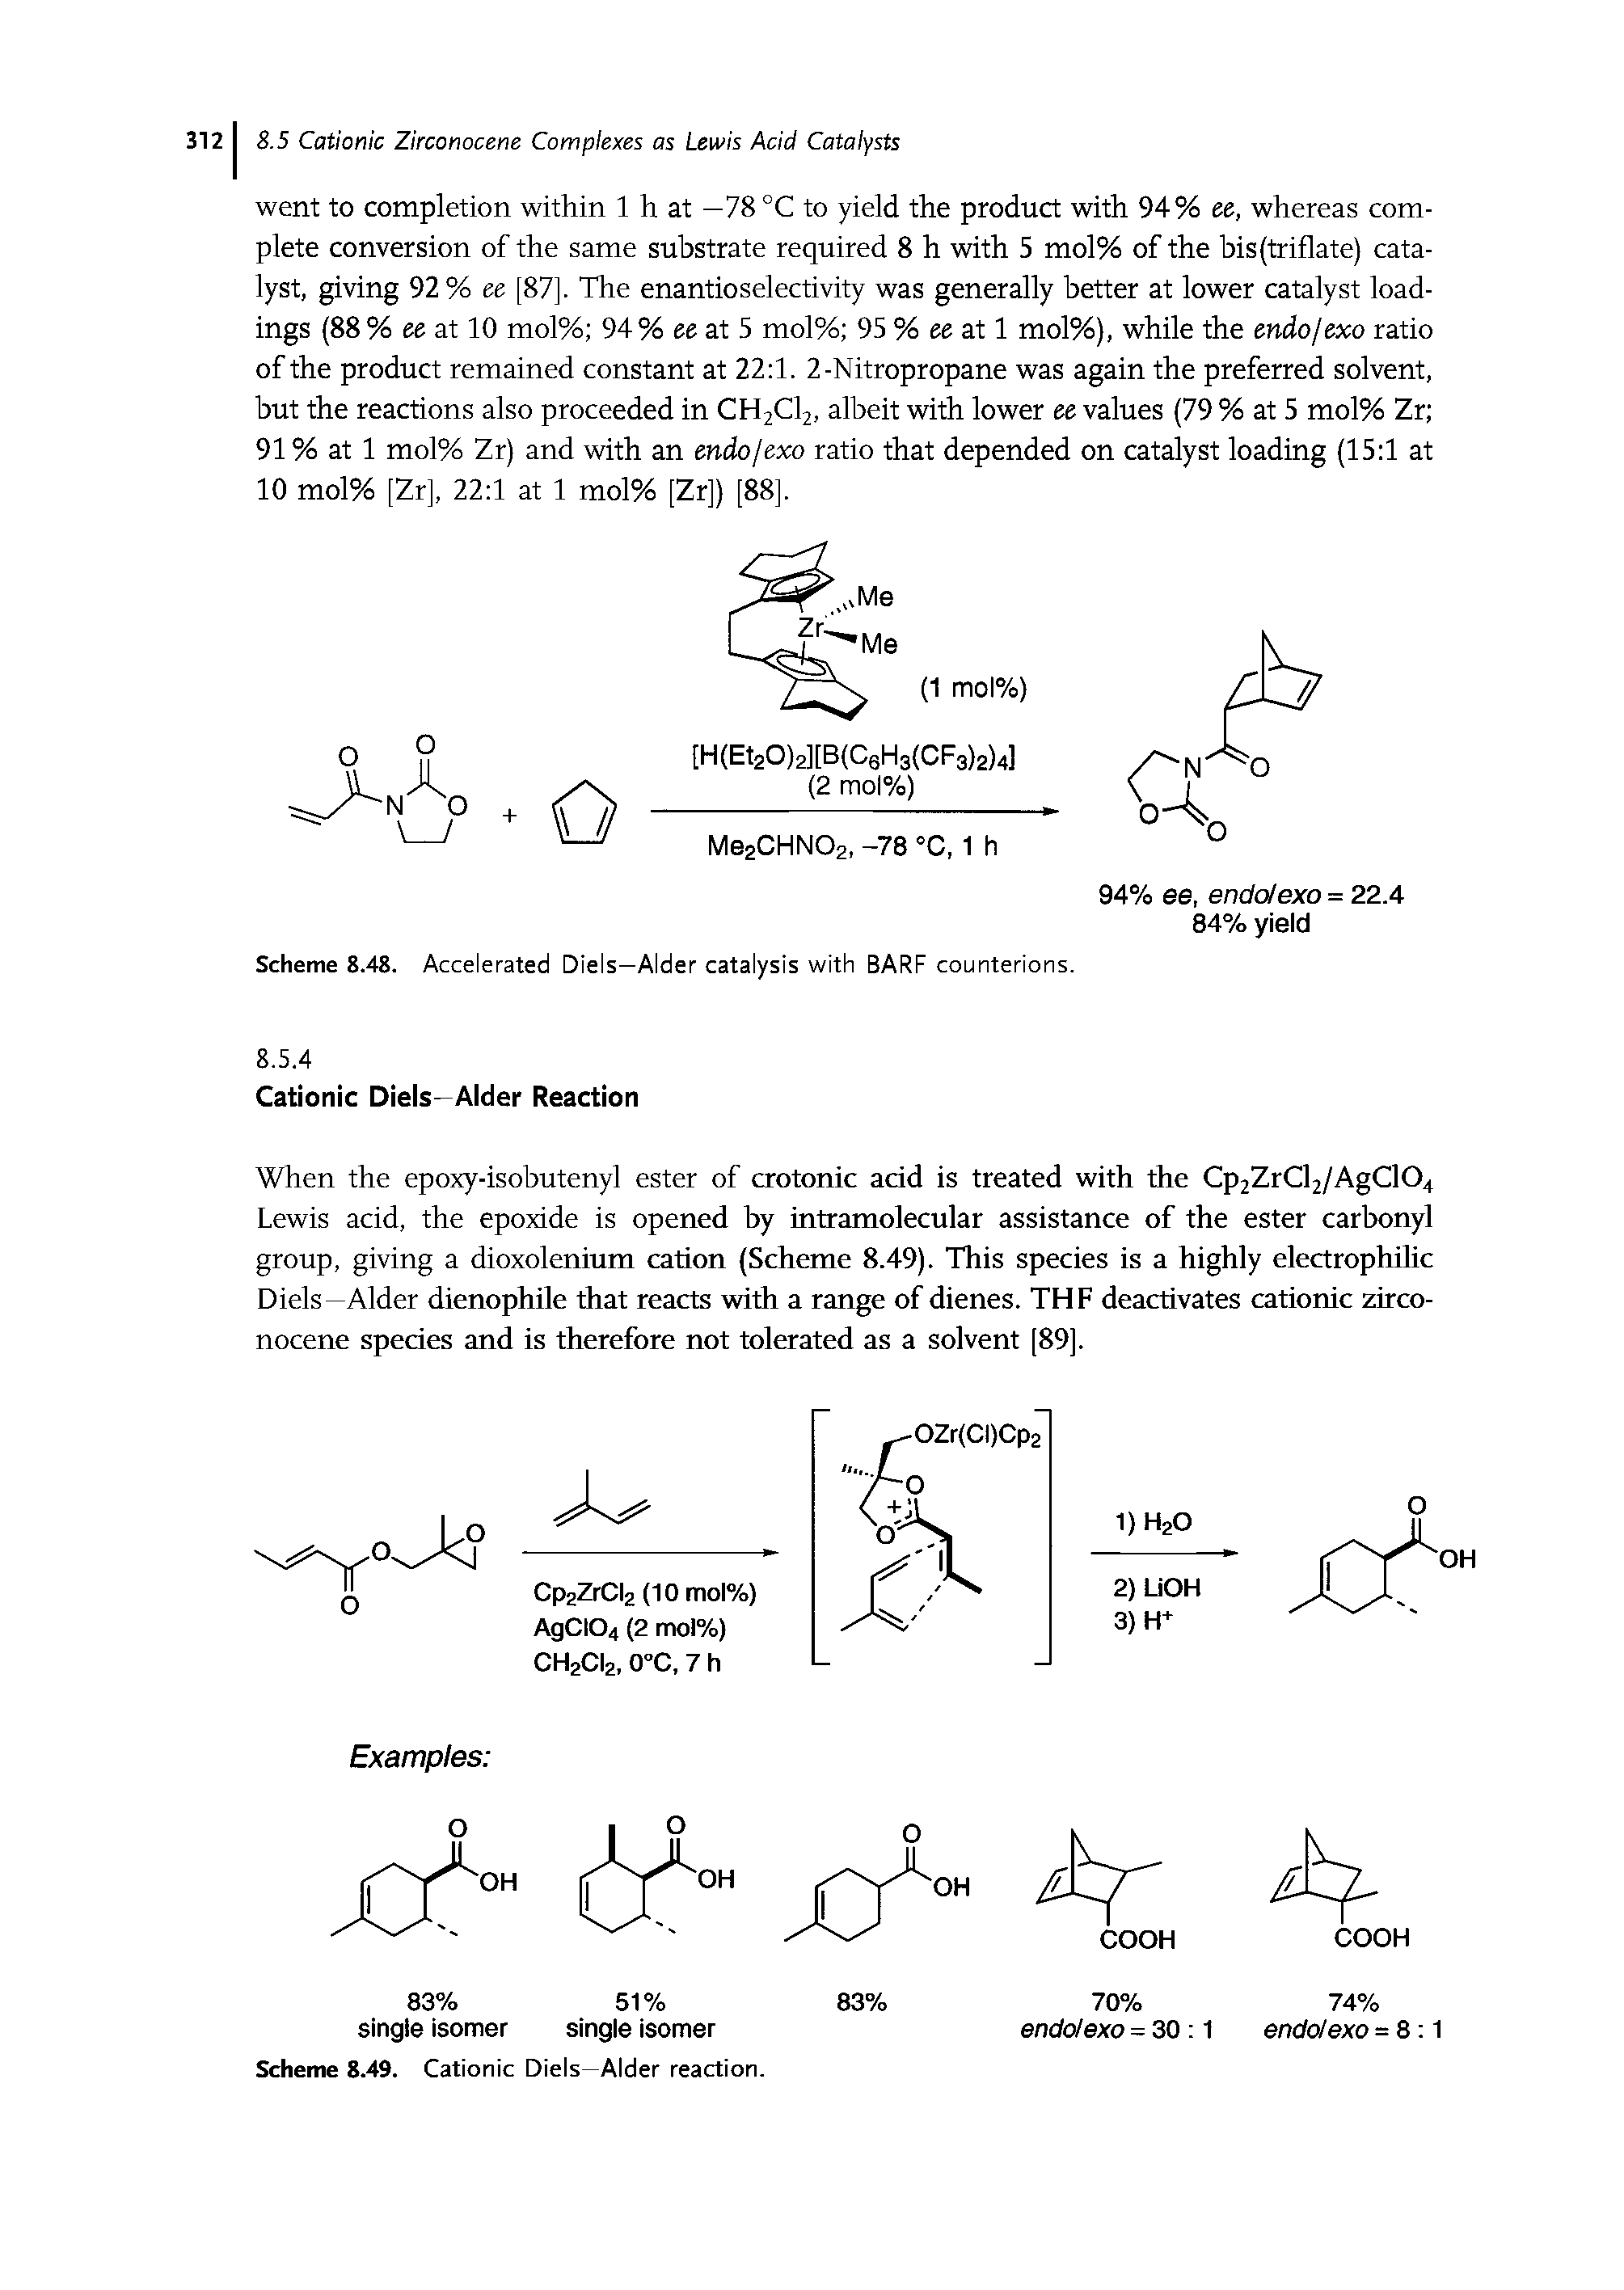 Scheme 8.48. Accelerated Diels—Alder catalysis with BARF counterions.